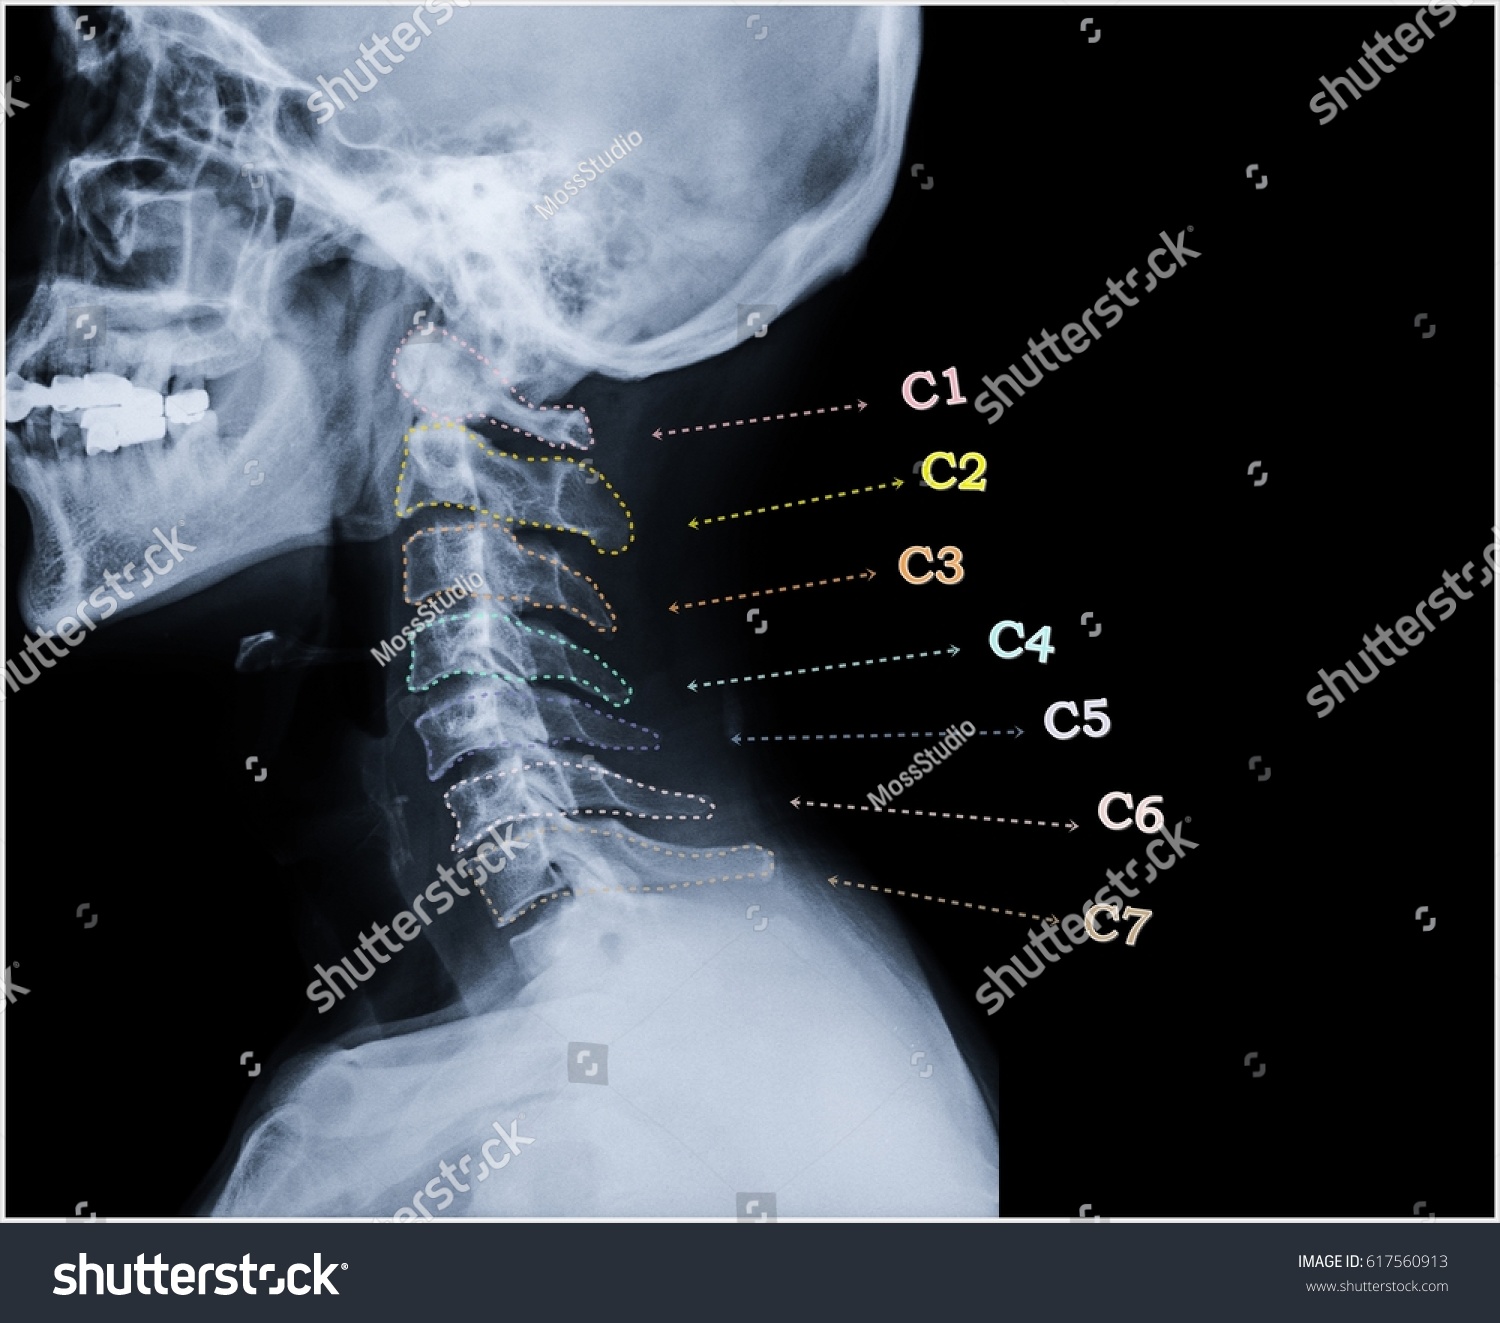 lateral cervical spine x ray